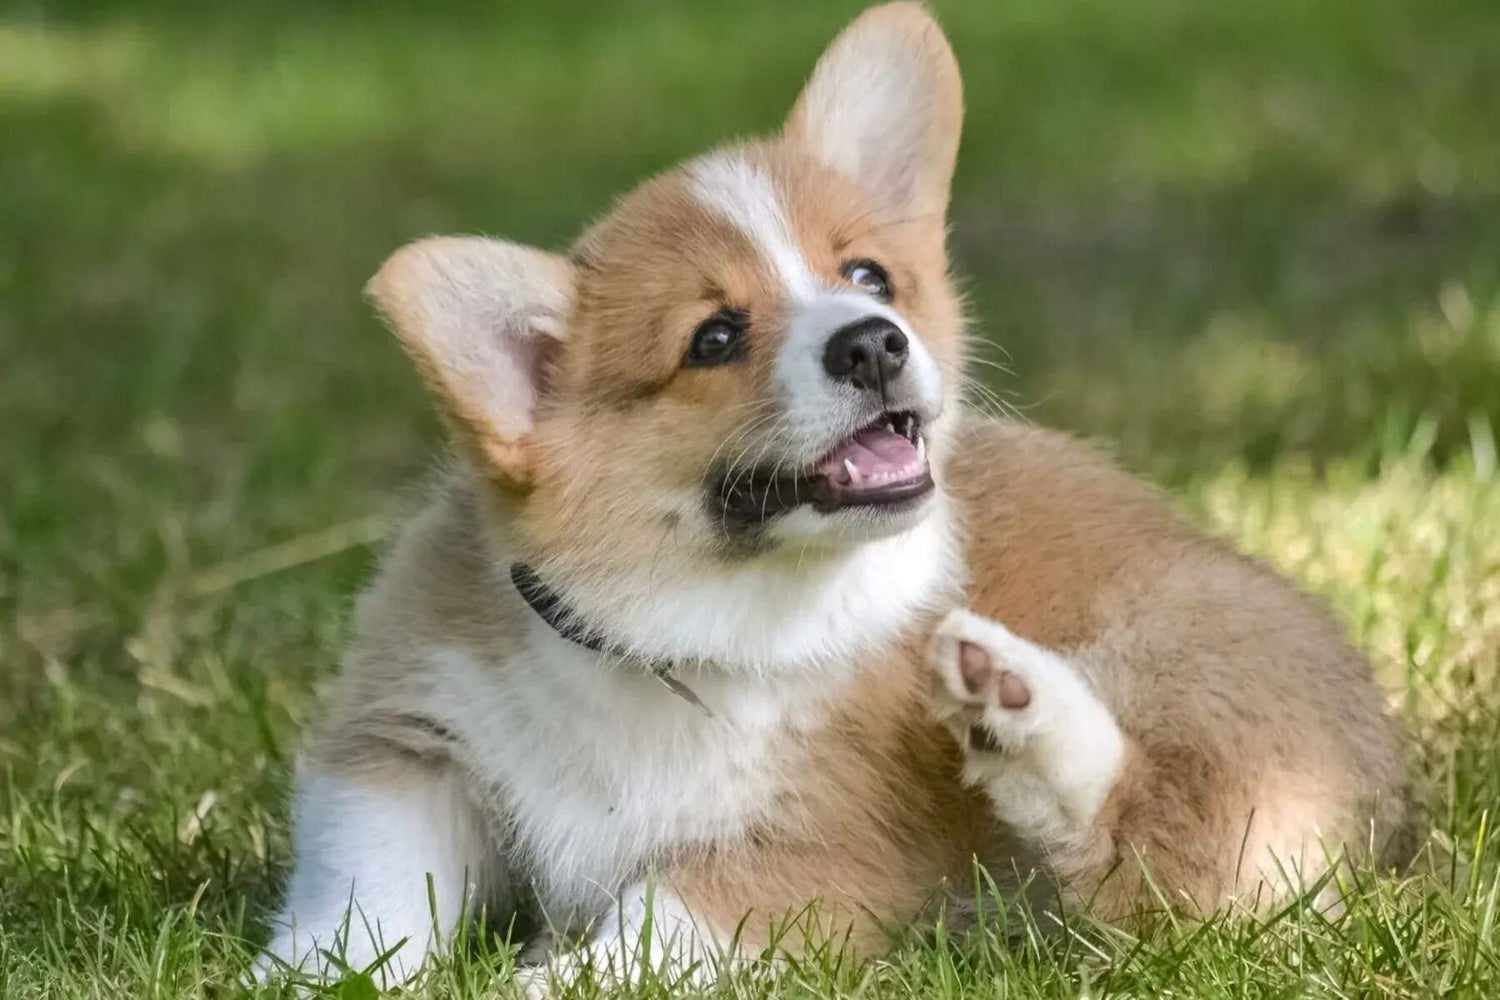 A corgi sits in grass and scratches itself.